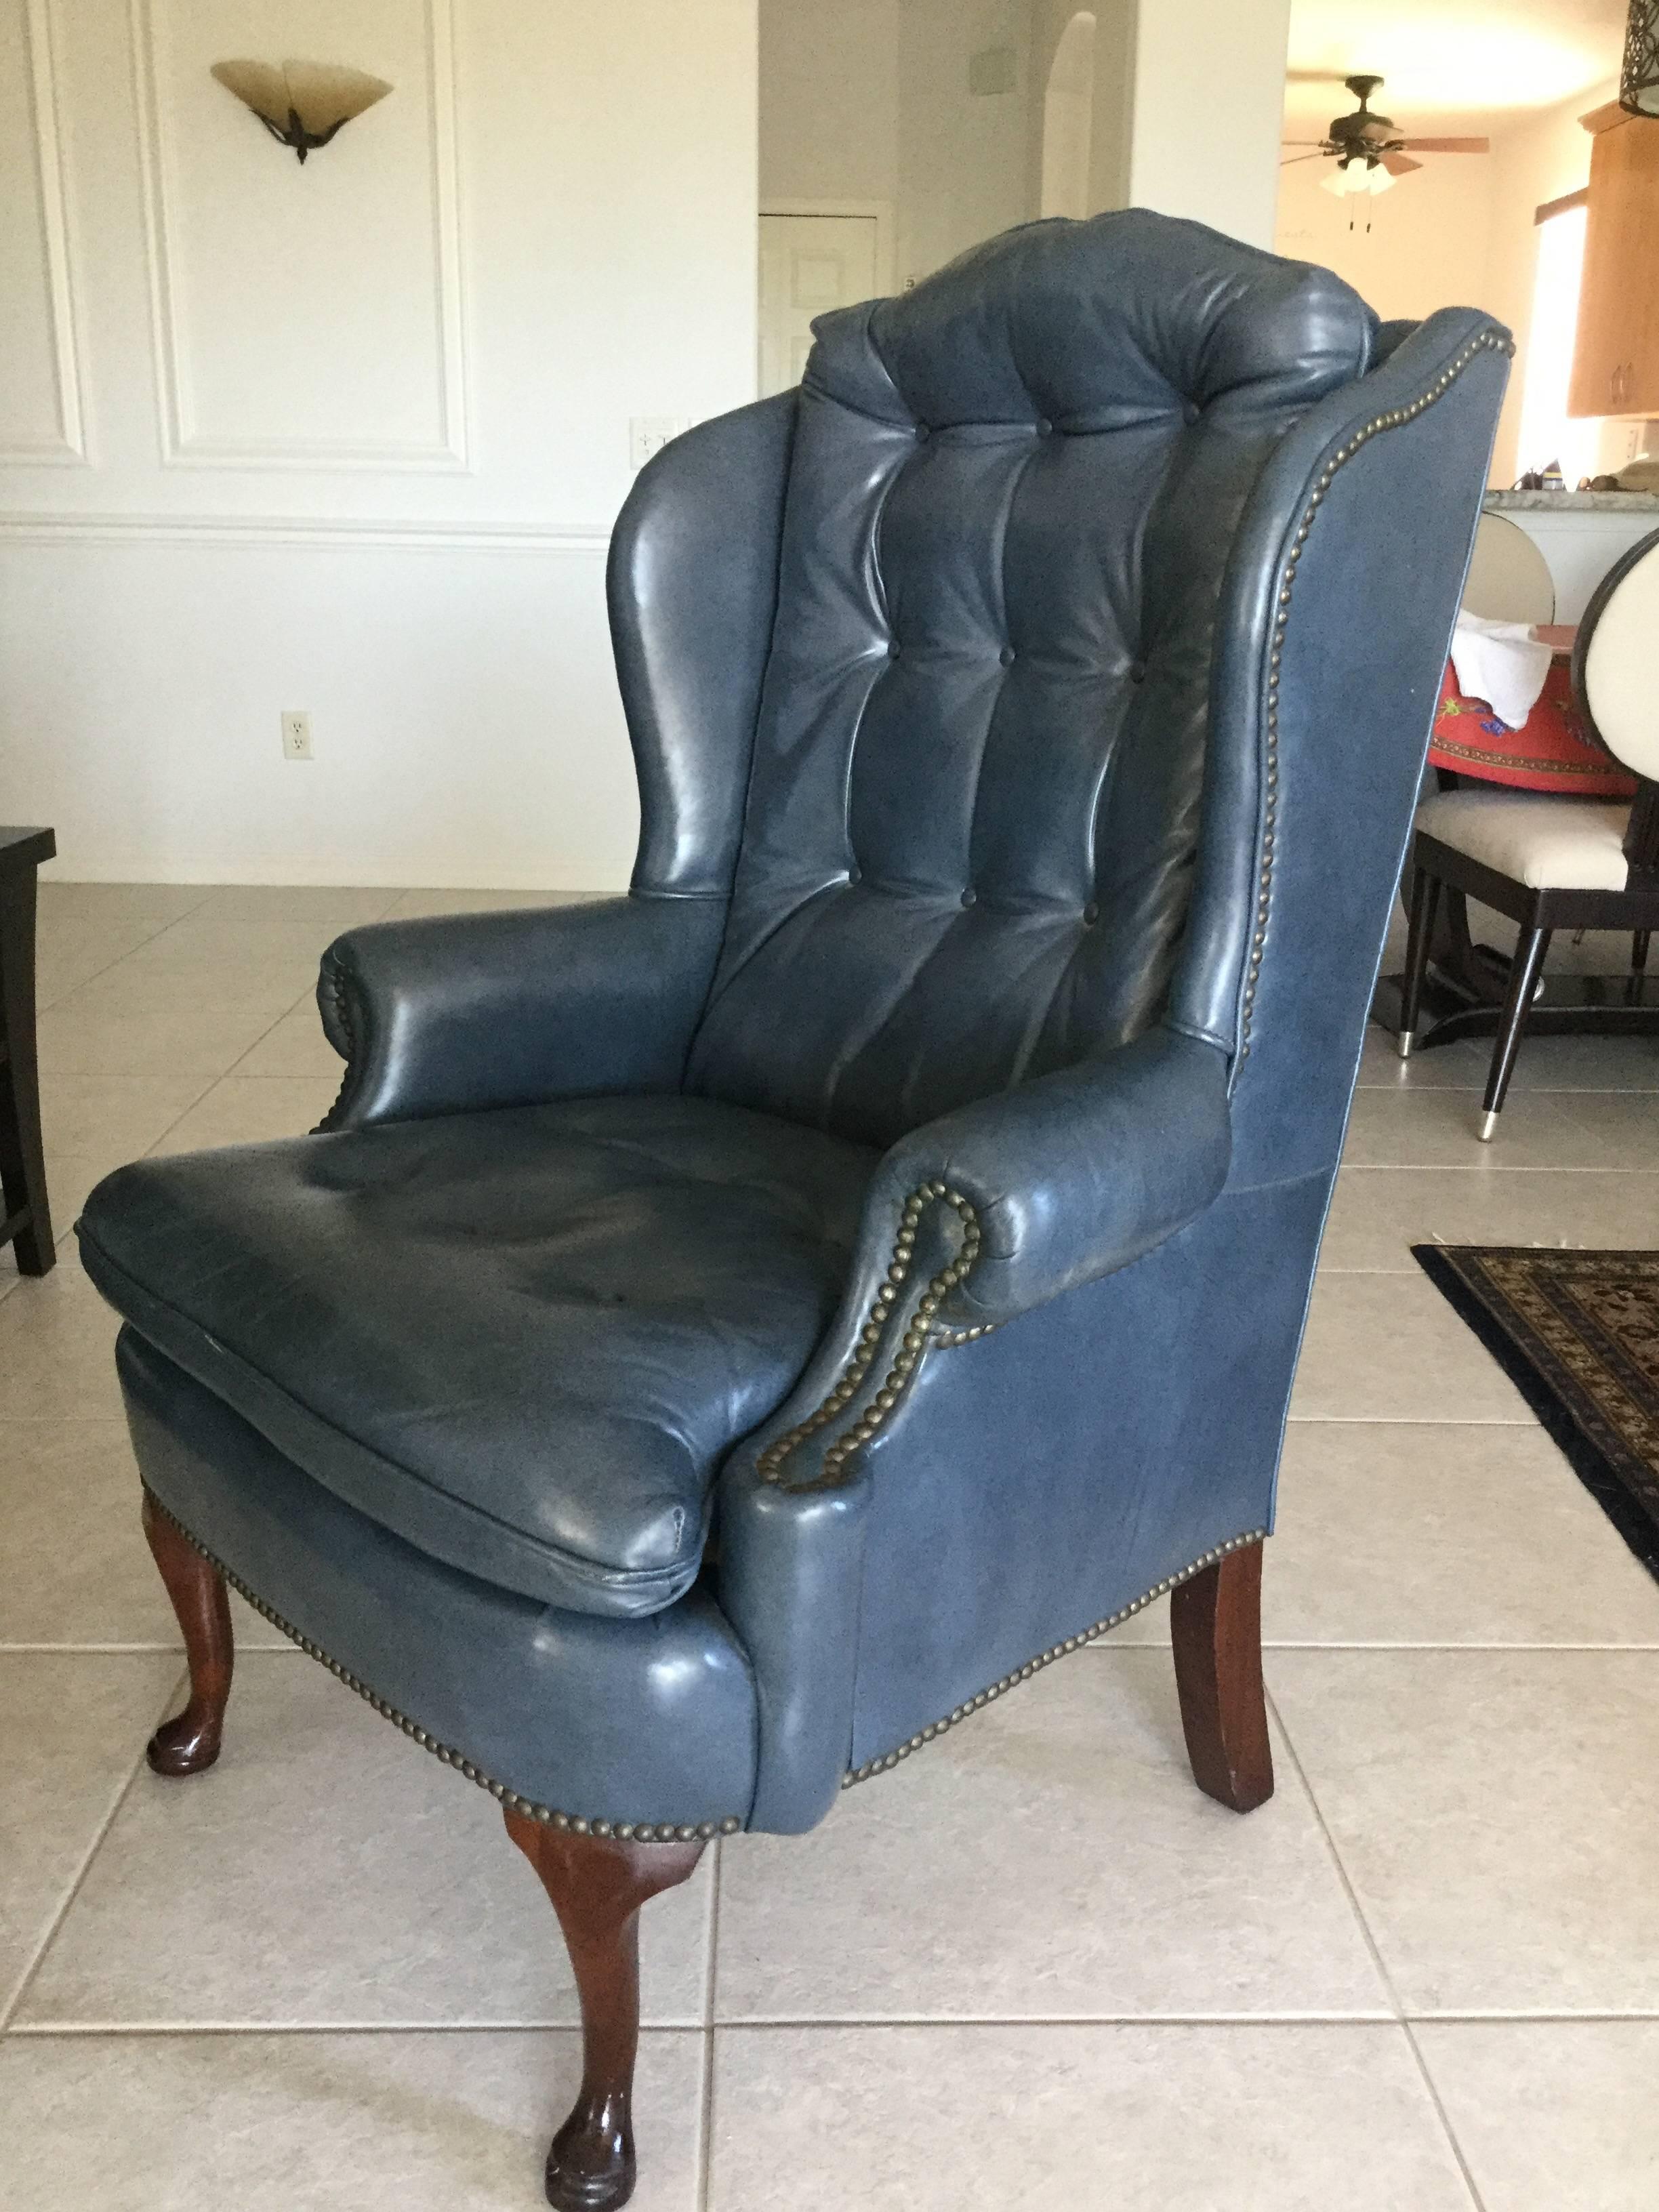 Handsome steel blue leather wingback chair having tufted seat and back cushion, Queen-Anne legs, brass nail heads, and rounded arm rests. Made by Classic Leather of Hickory, N.C. Mint condition.
Measure: Seat is 21 deep x 26.5 wide. Seat height is